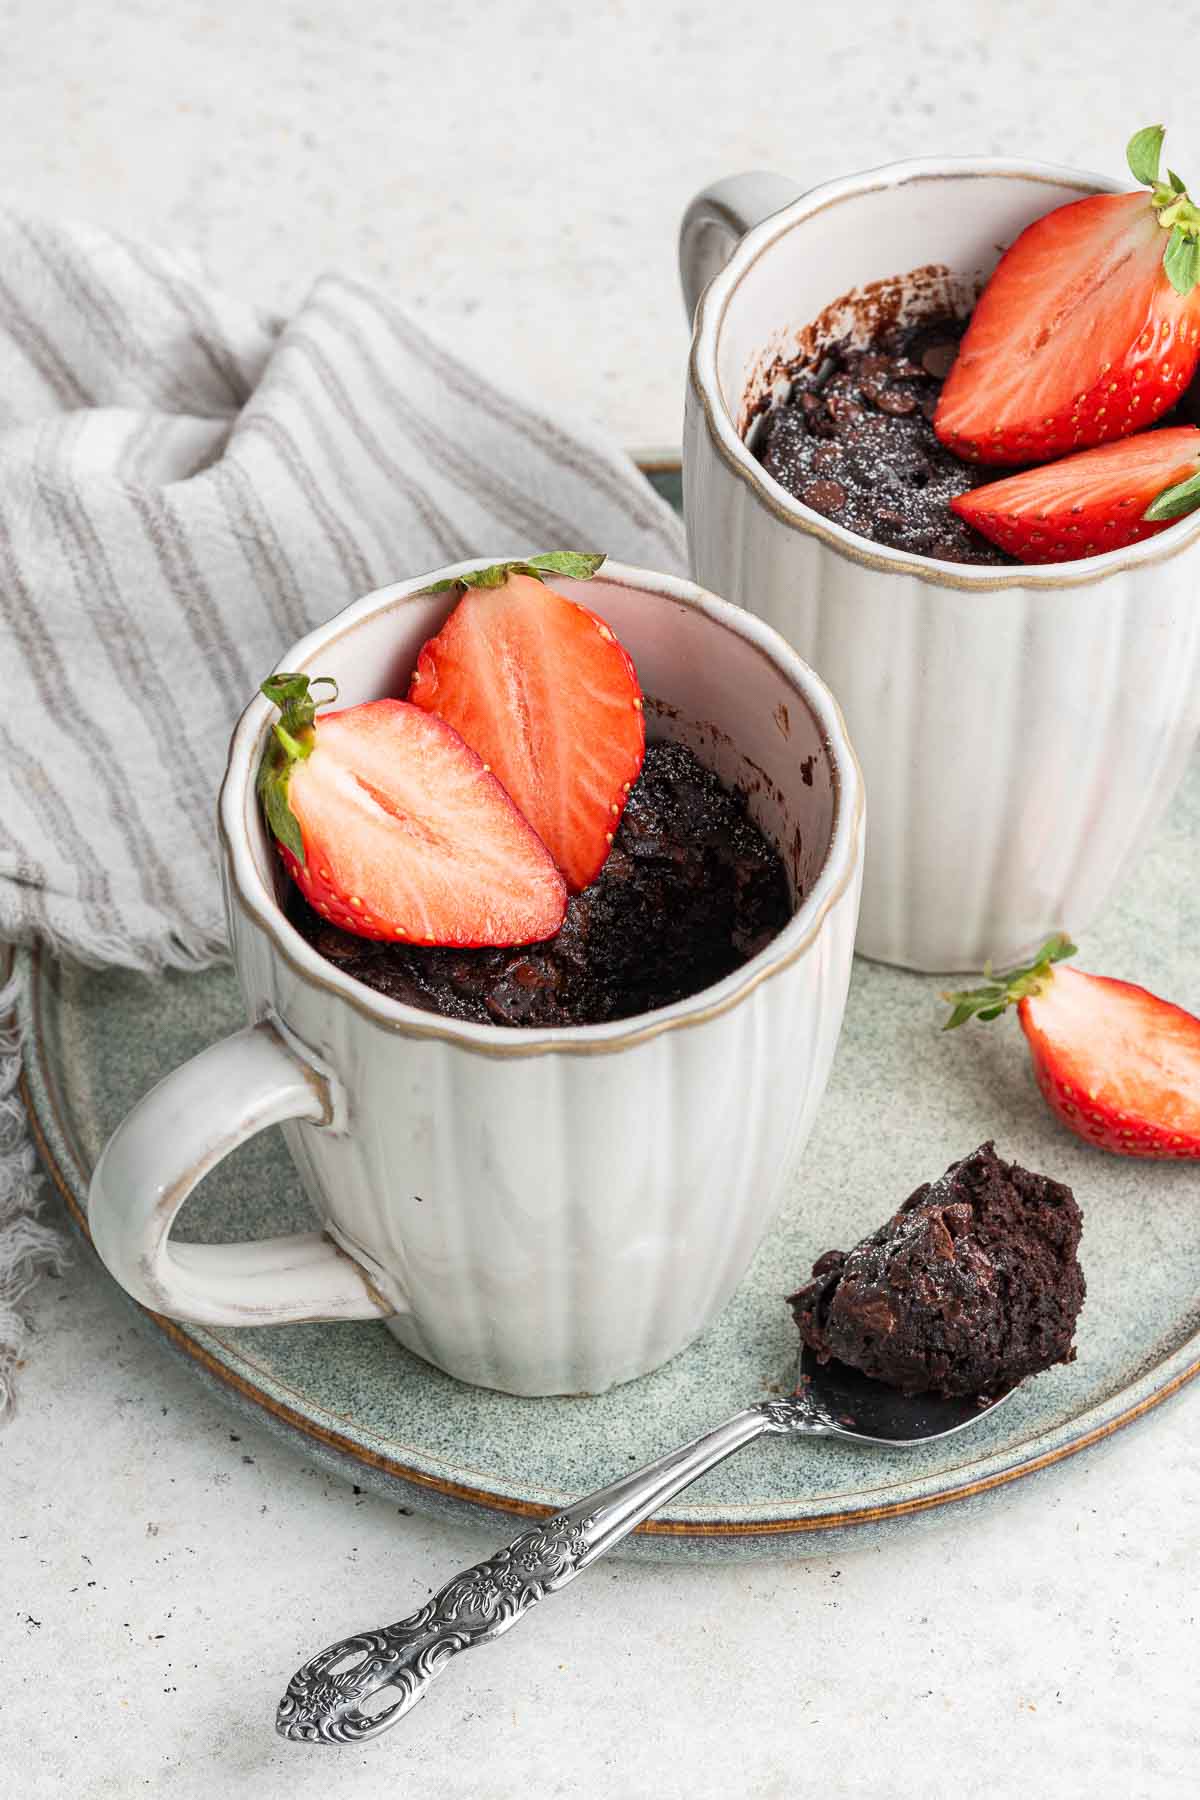 Two coffee cups with a dark treat topped with strawberries and spoon on side.